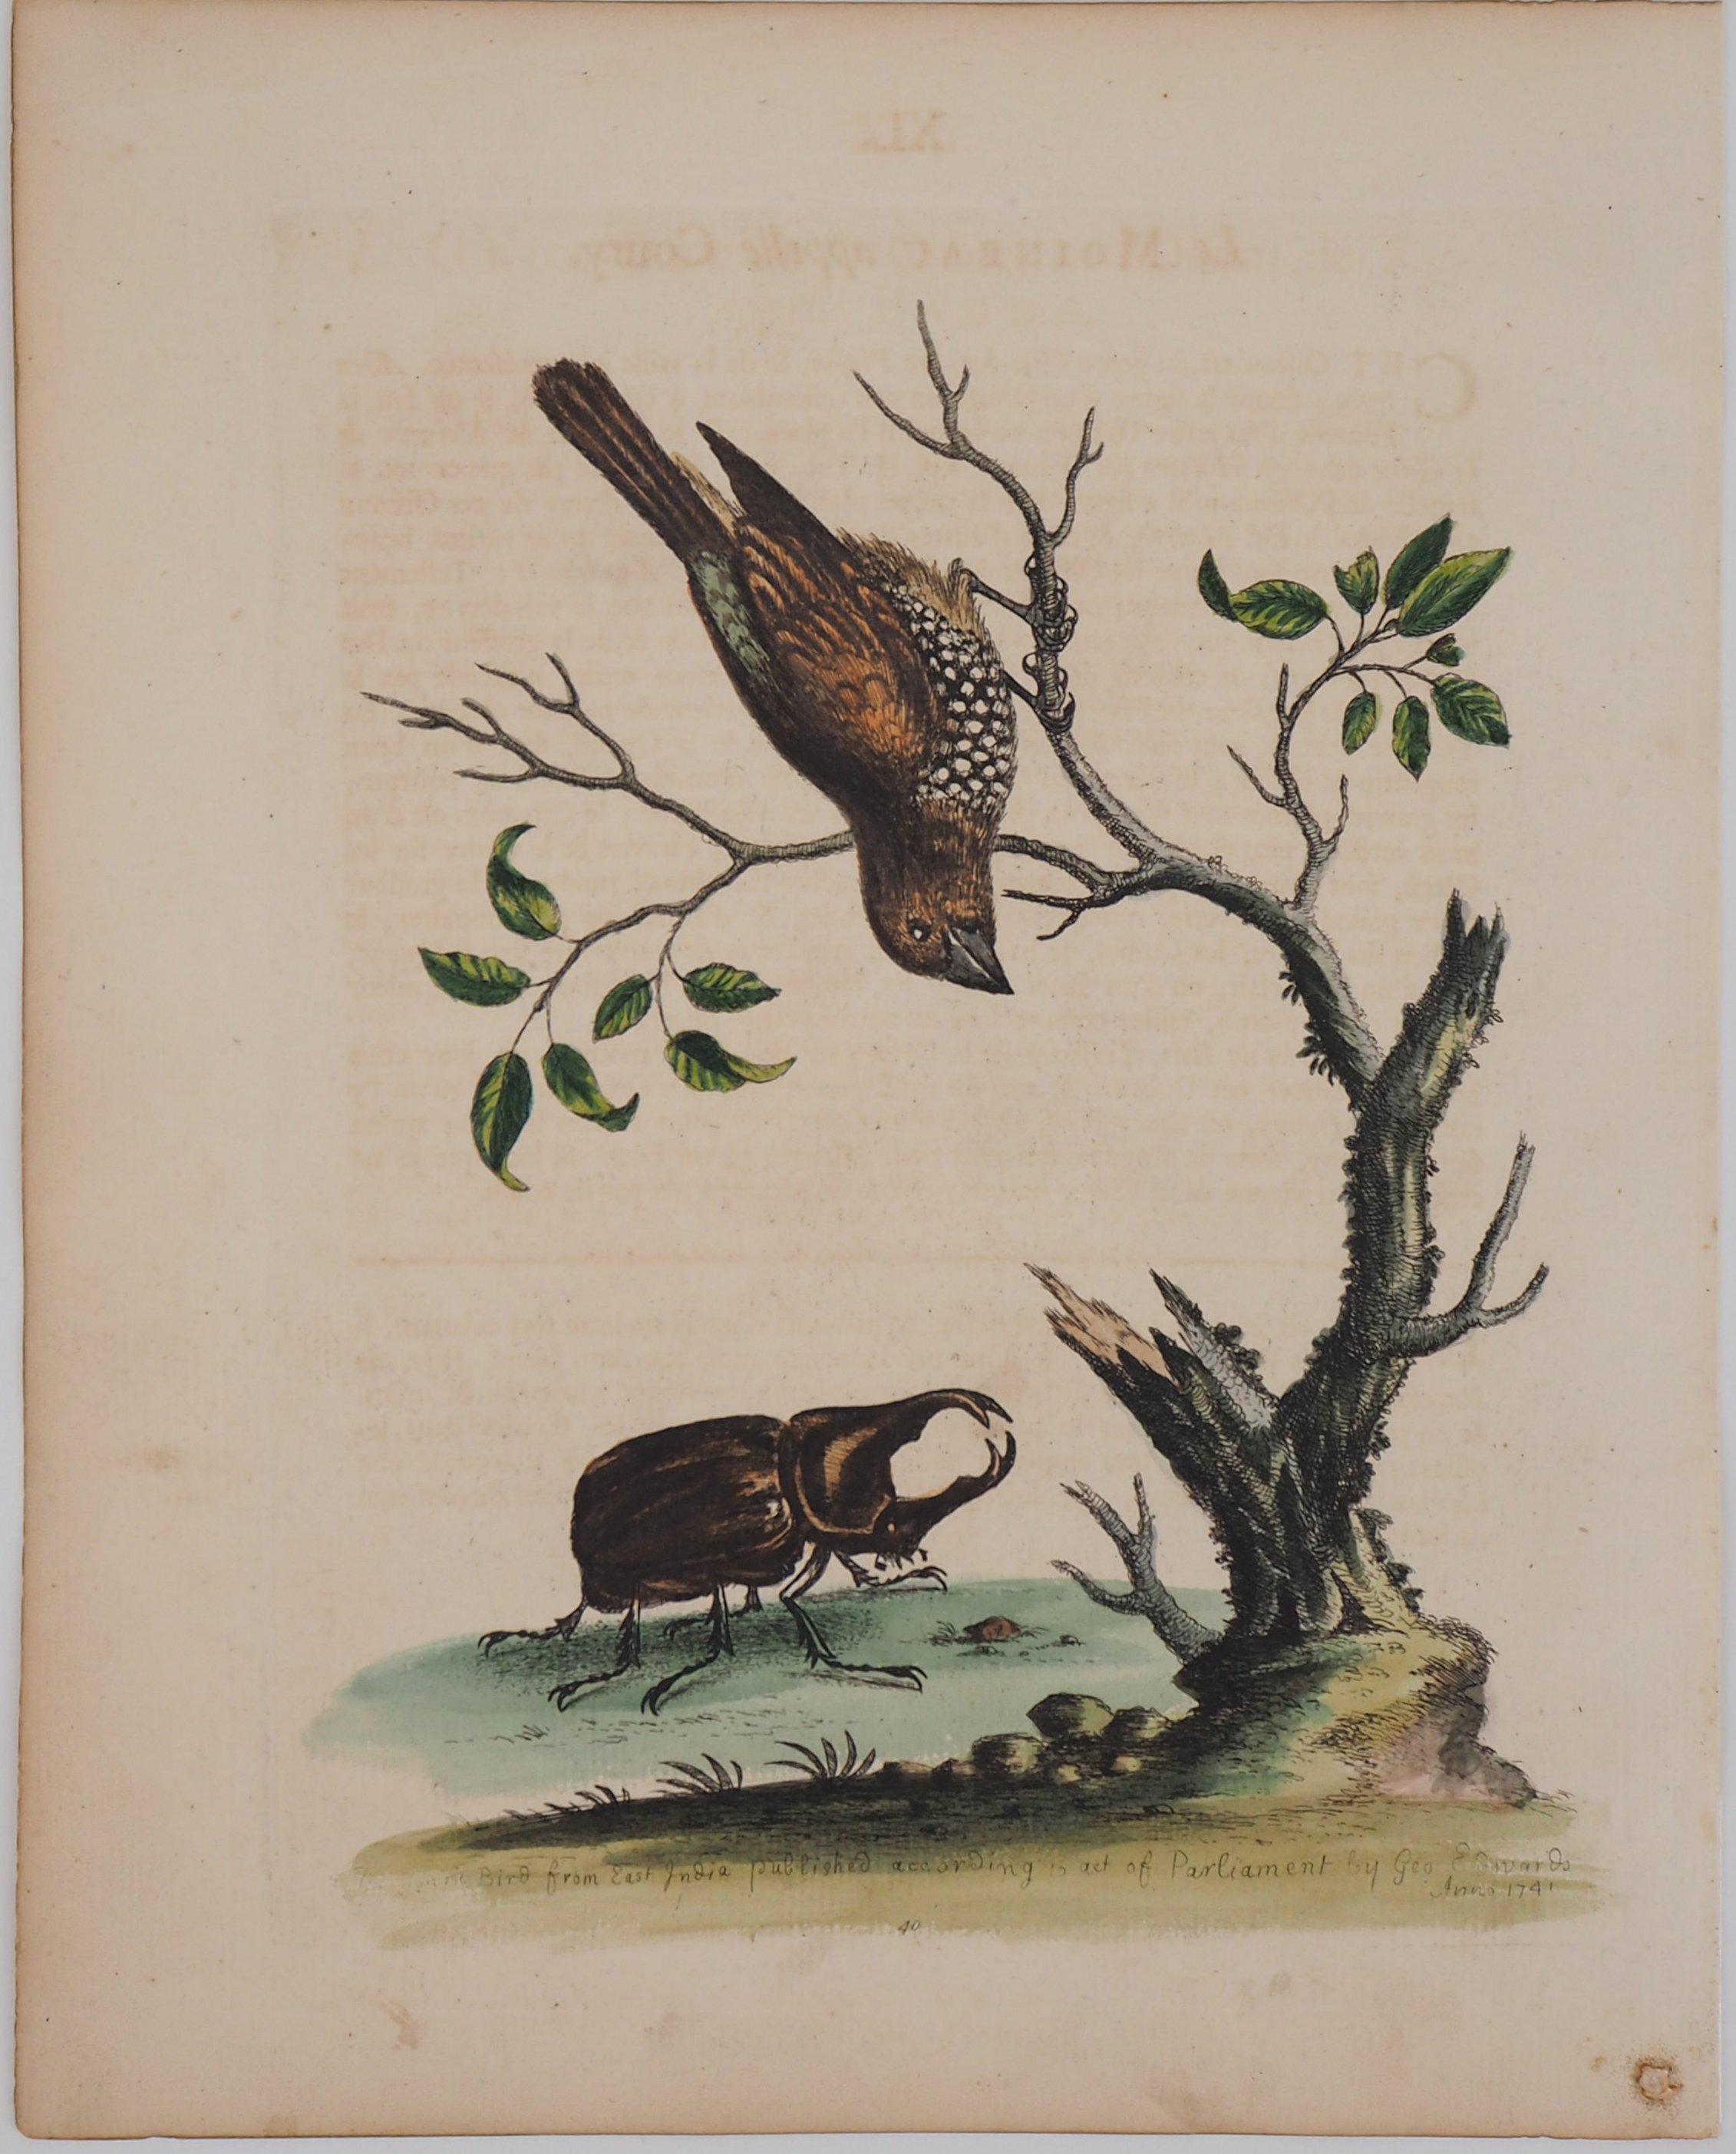 George Edwards Animal Print -  Bird and Beetle - Etching and watercolor (Natural History of Birds, 1741)